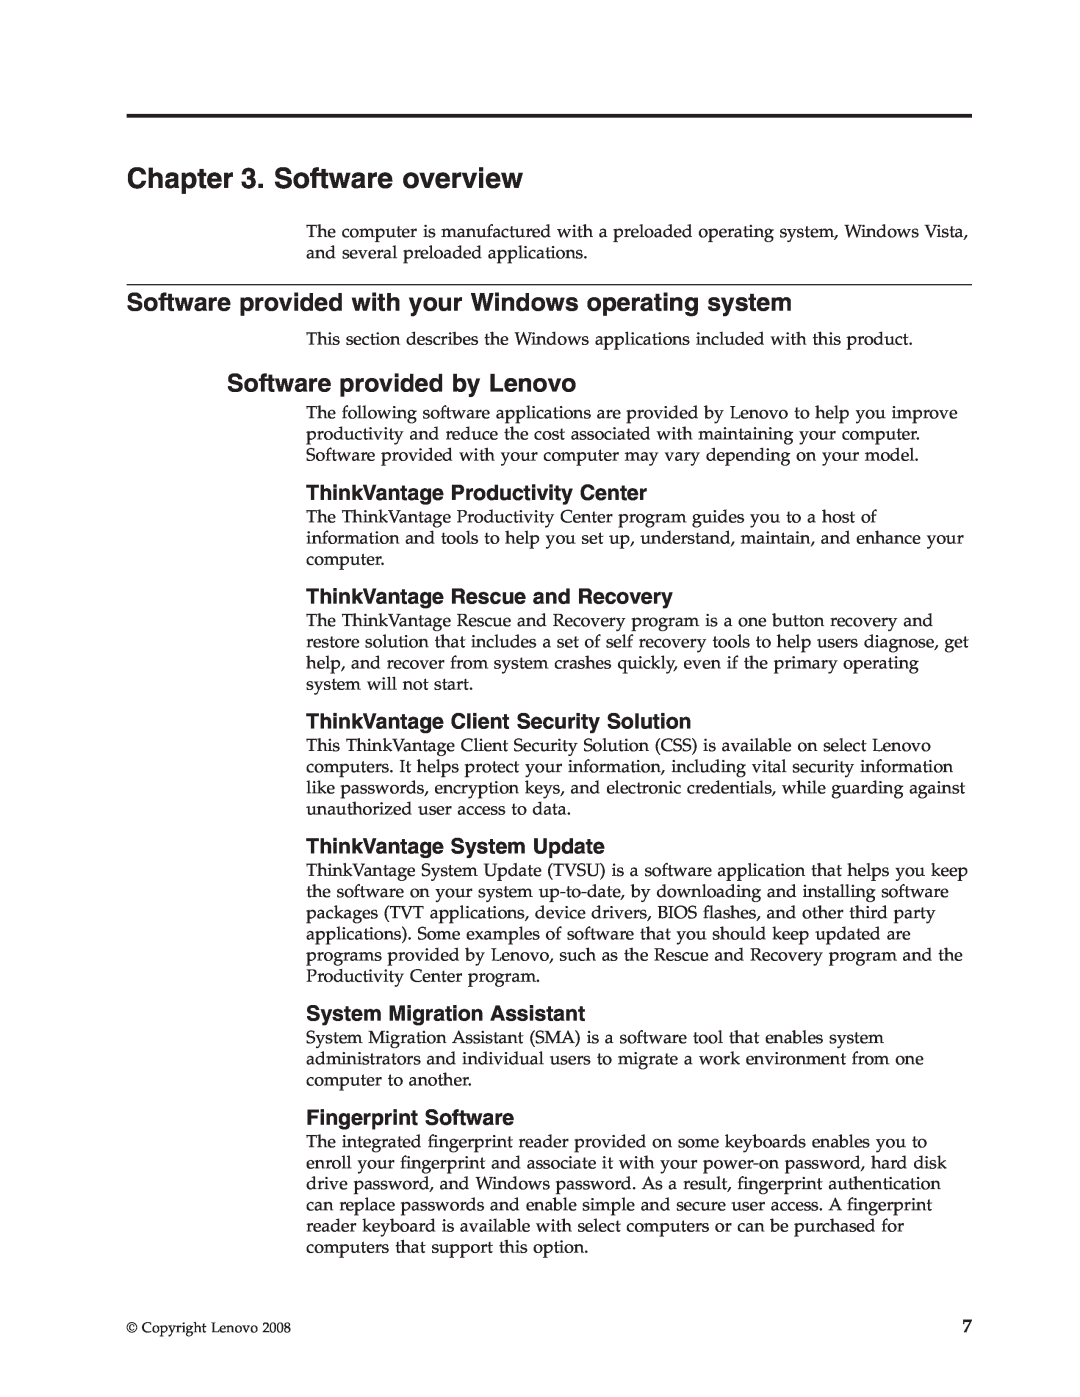 Lenovo 6176 Software overview, Software provided by Lenovo, ThinkVantage Productivity Center, ThinkVantage System Update 